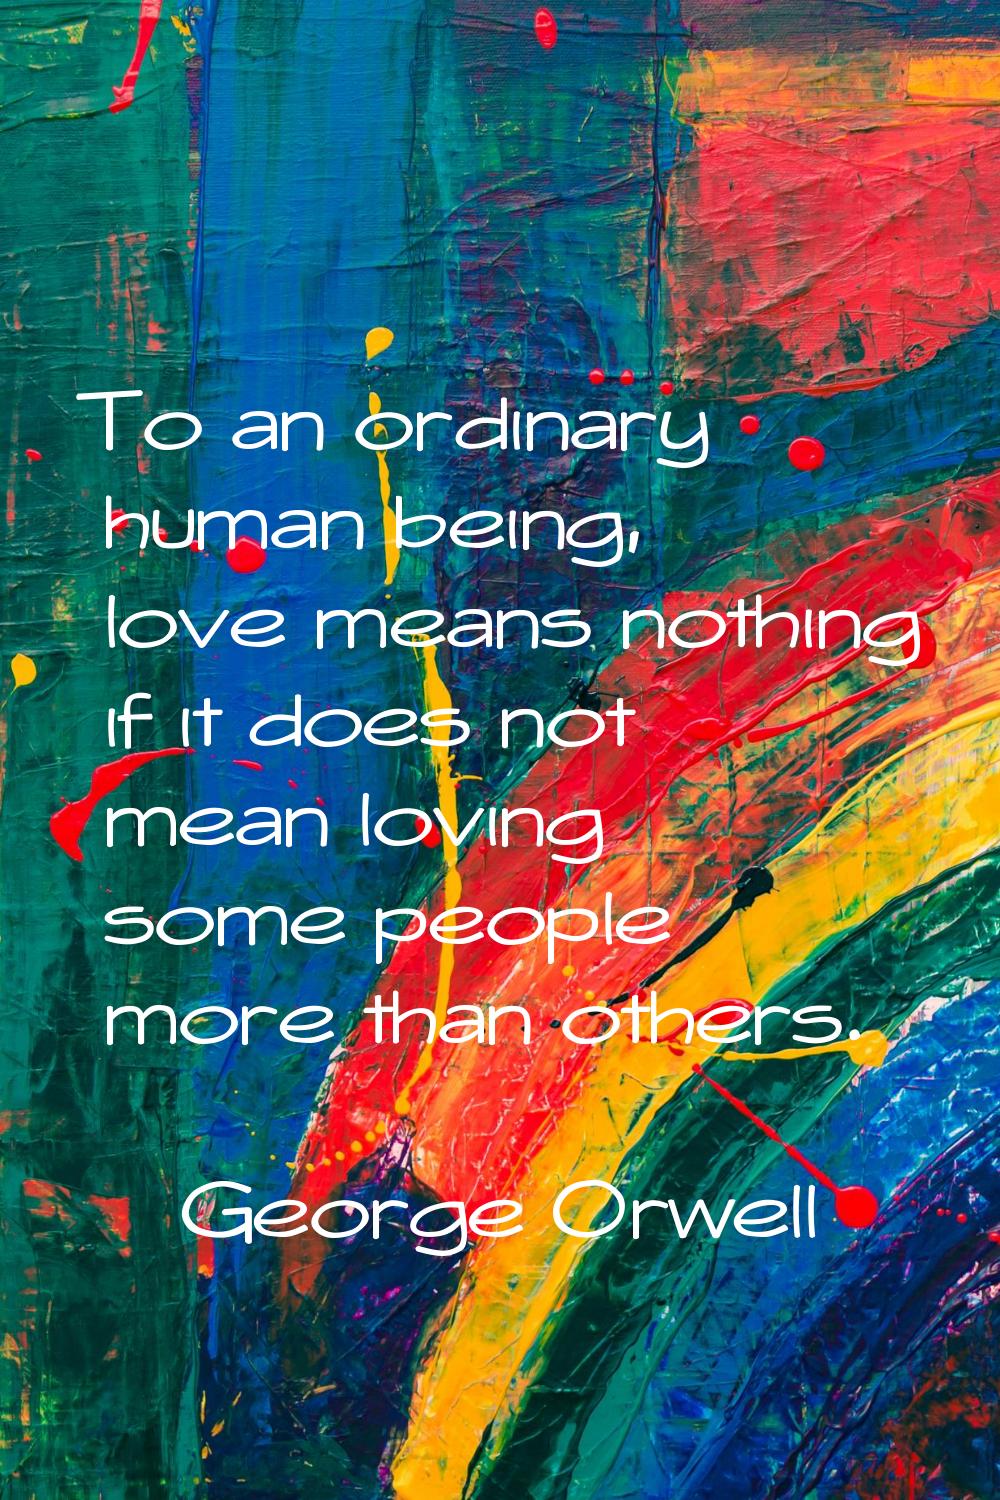 To an ordinary human being, love means nothing if it does not mean loving some people more than oth